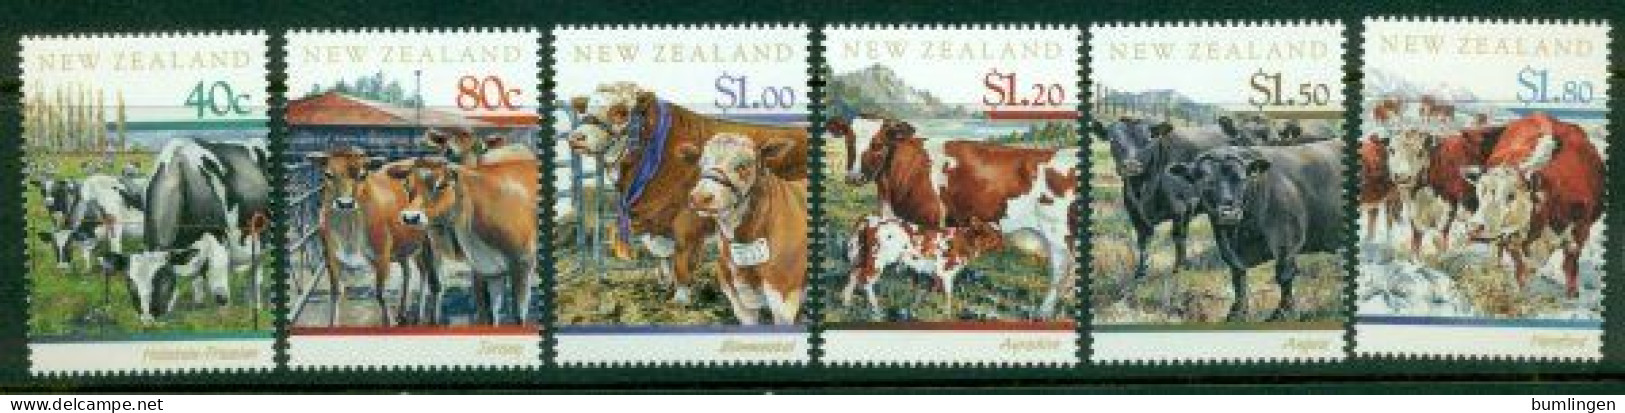 NEW ZEALAND 1997 Mi 1571-76A** Year Of The Ox – Cow Breeds [B1060] - Cows